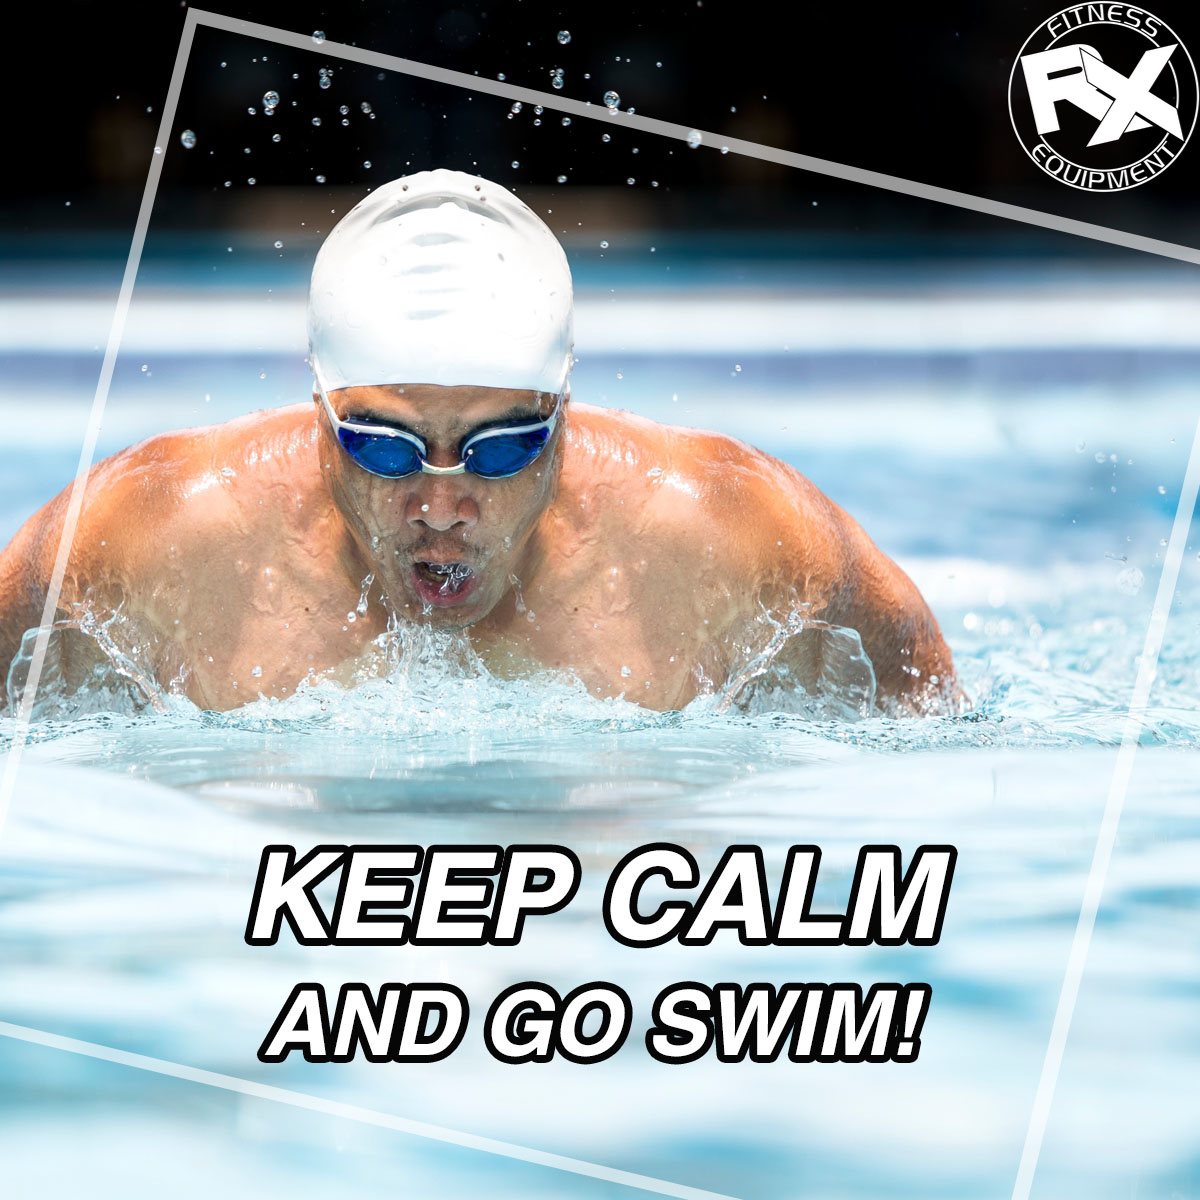 Swimming is a great two-for-one deal. Cool off and get your exercise in at the same time! #rxfitnessequipment #fitnessequipment #exerciseequipment #strengthtraining #fitnessgoals #fitnessmotivation #fitfam #personaltrainer #getfit #instafitness